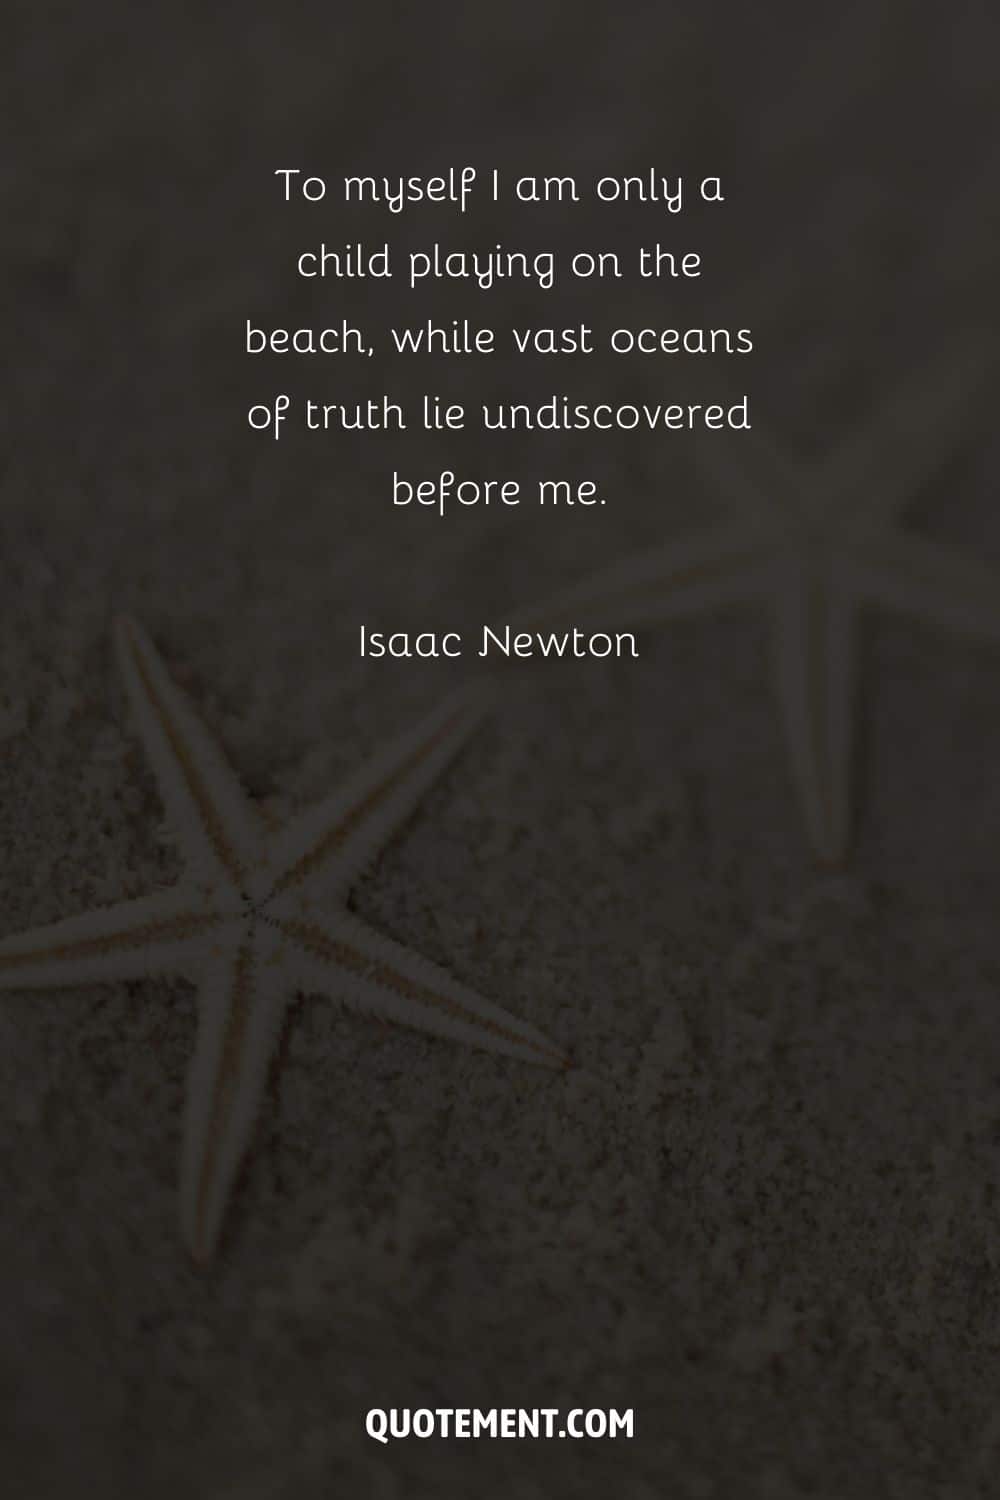 To myself I am only a child playing on the beach, while vast oceans of truth lie undiscovered before me. – Isaac Newton